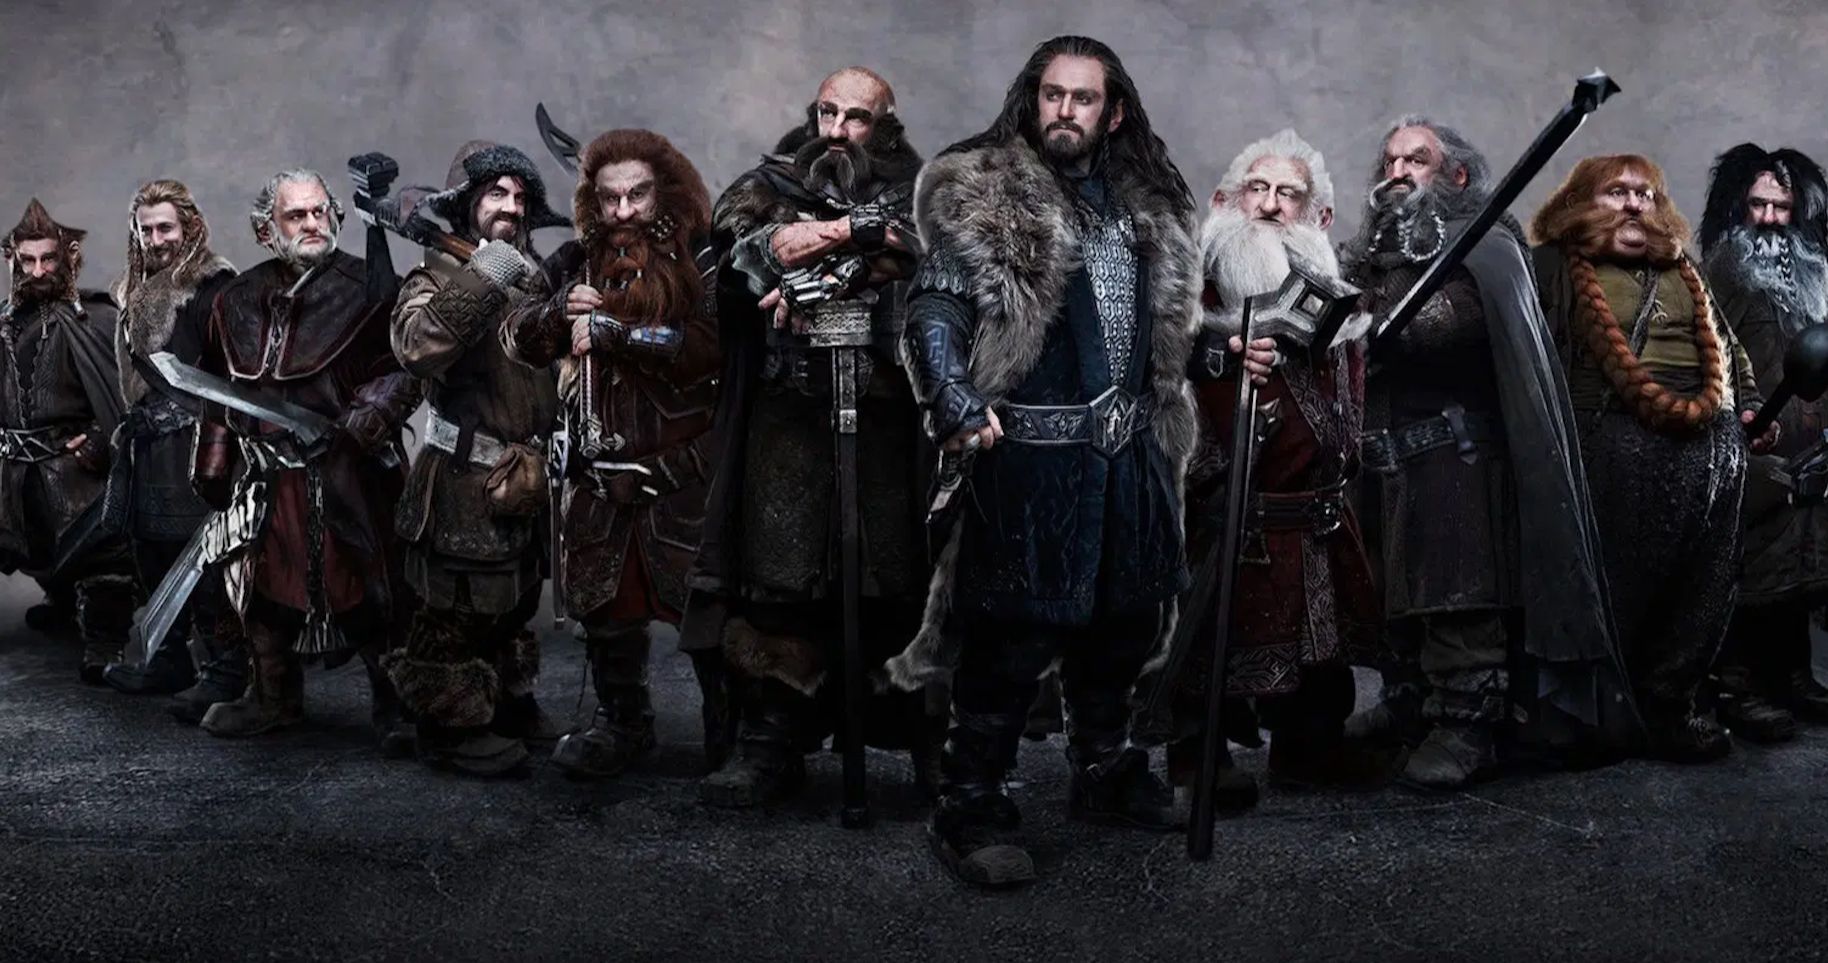 The Hobbit Actor Blames Studio Interference for Trilogy's Poor Performance